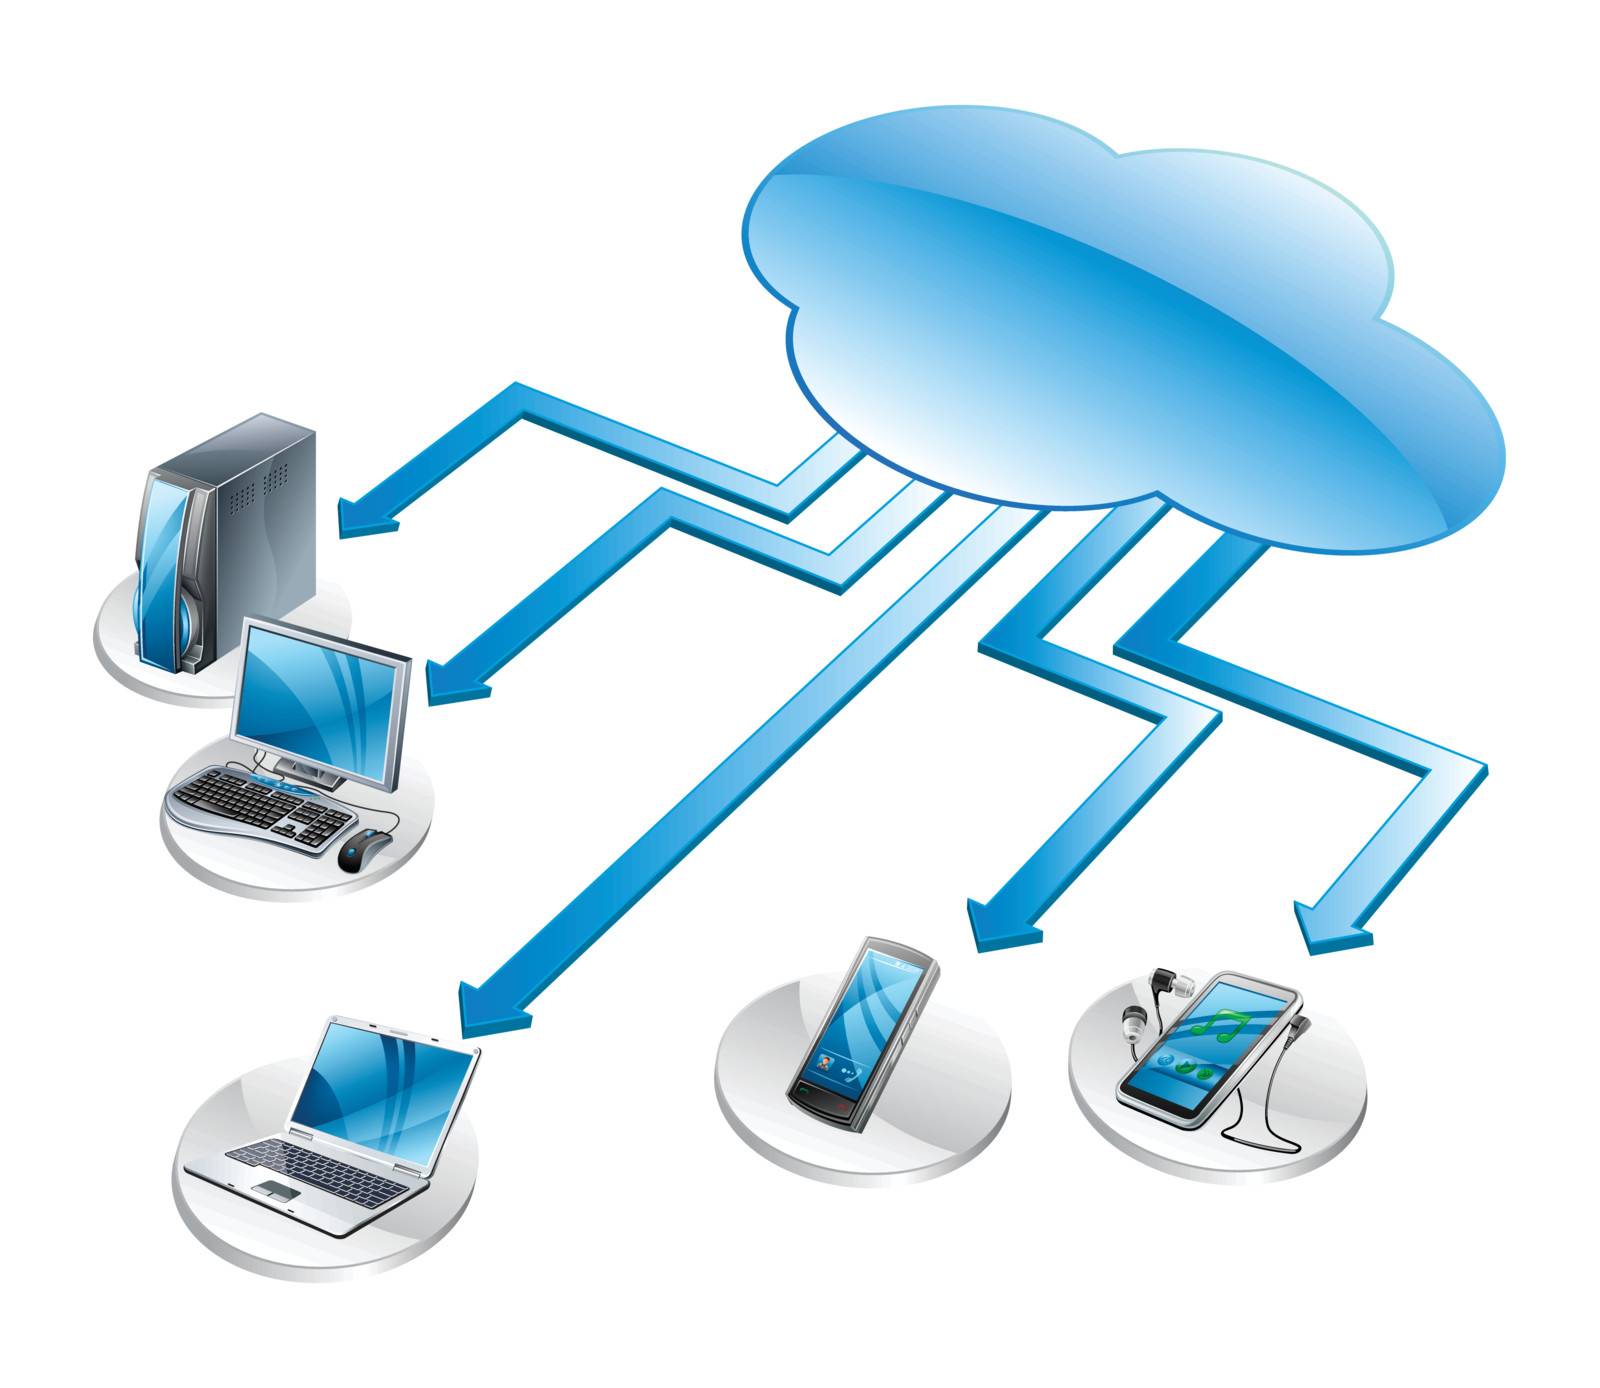 cloud computing networking technology by nirots